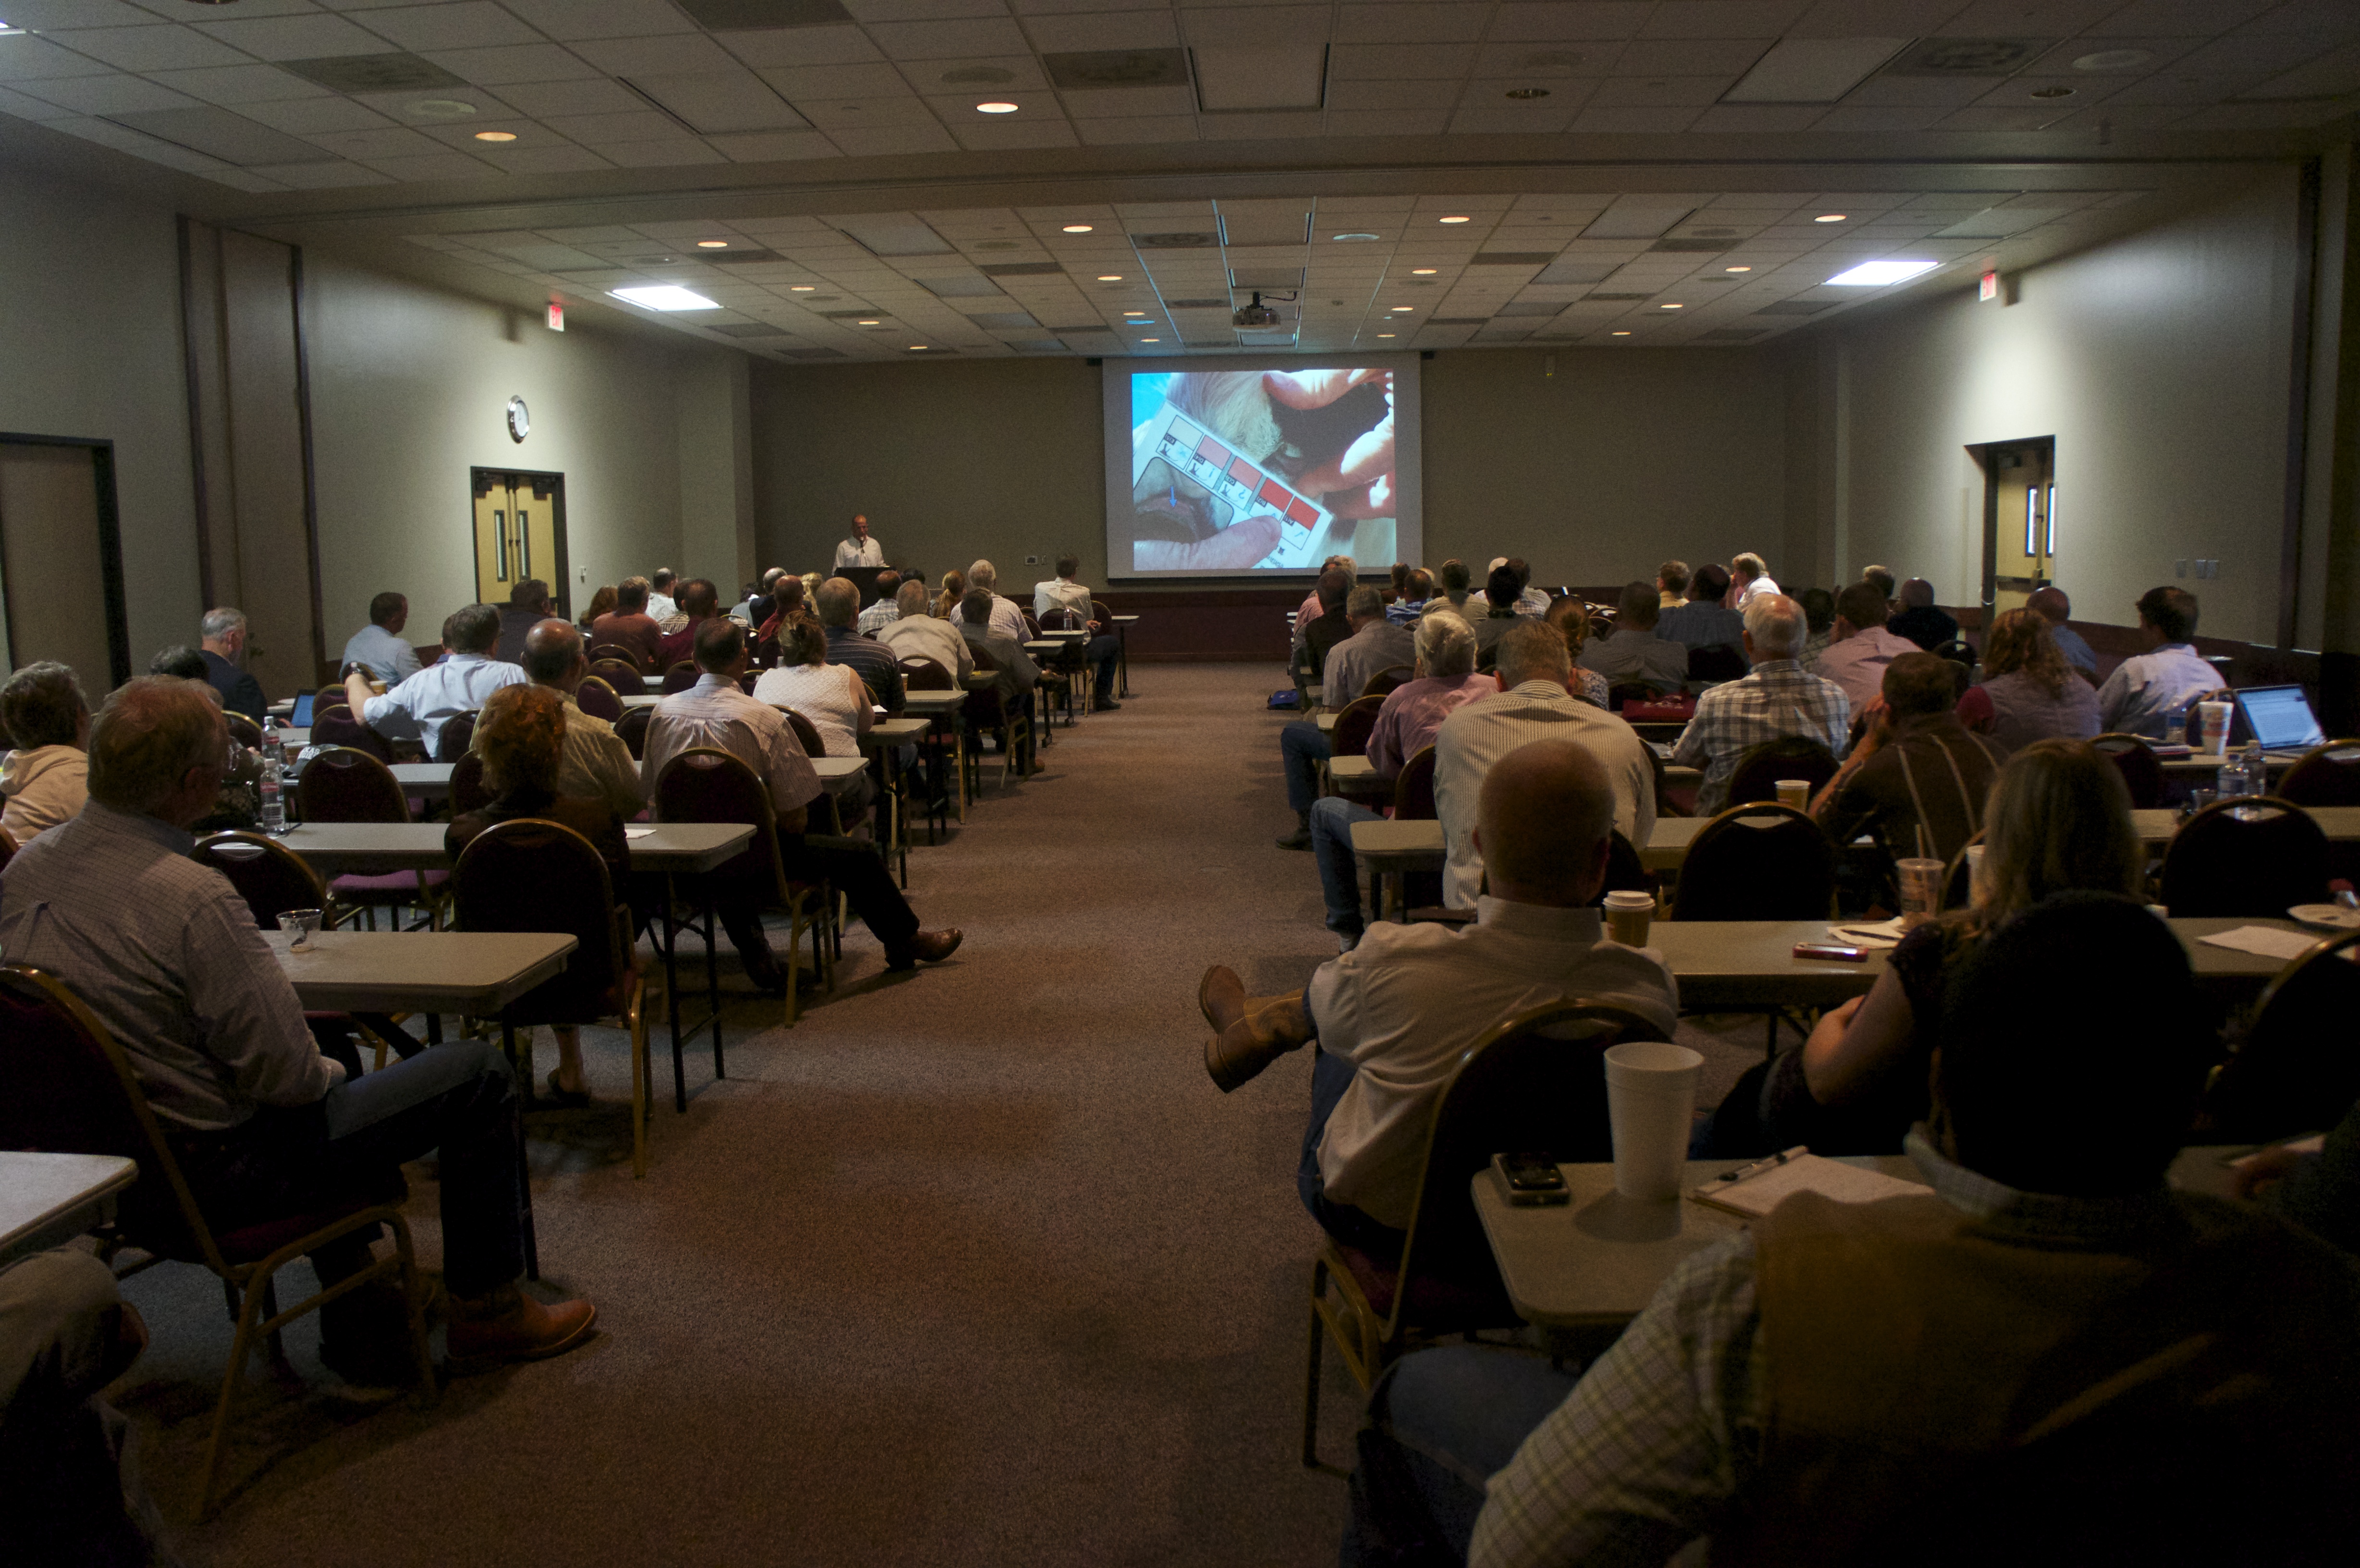 Continuing education seminar on beef cattle attracts more than 80 veterinarians ...4912 x 3264